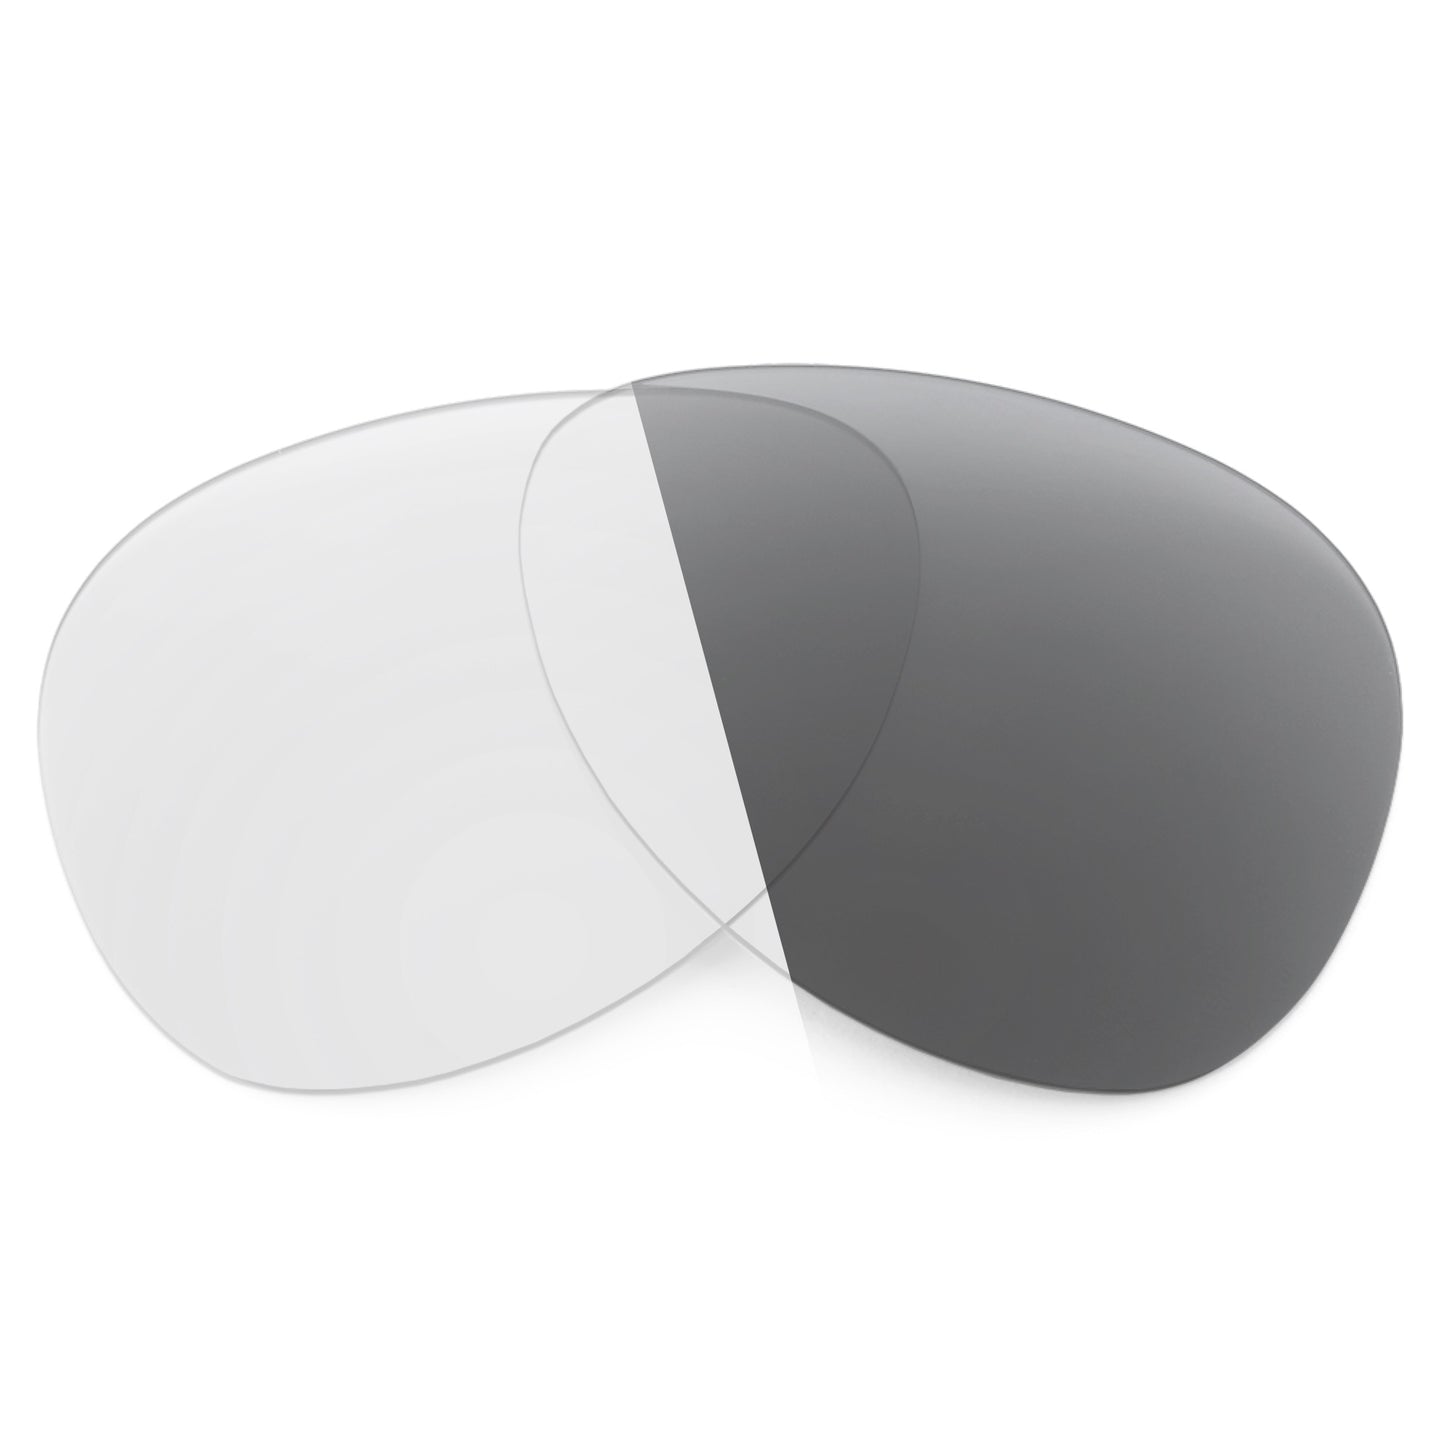 Revant replacement lenses for Ray-Ban RB3689 55mm Non-Polarized Adapt Gray Photochromic